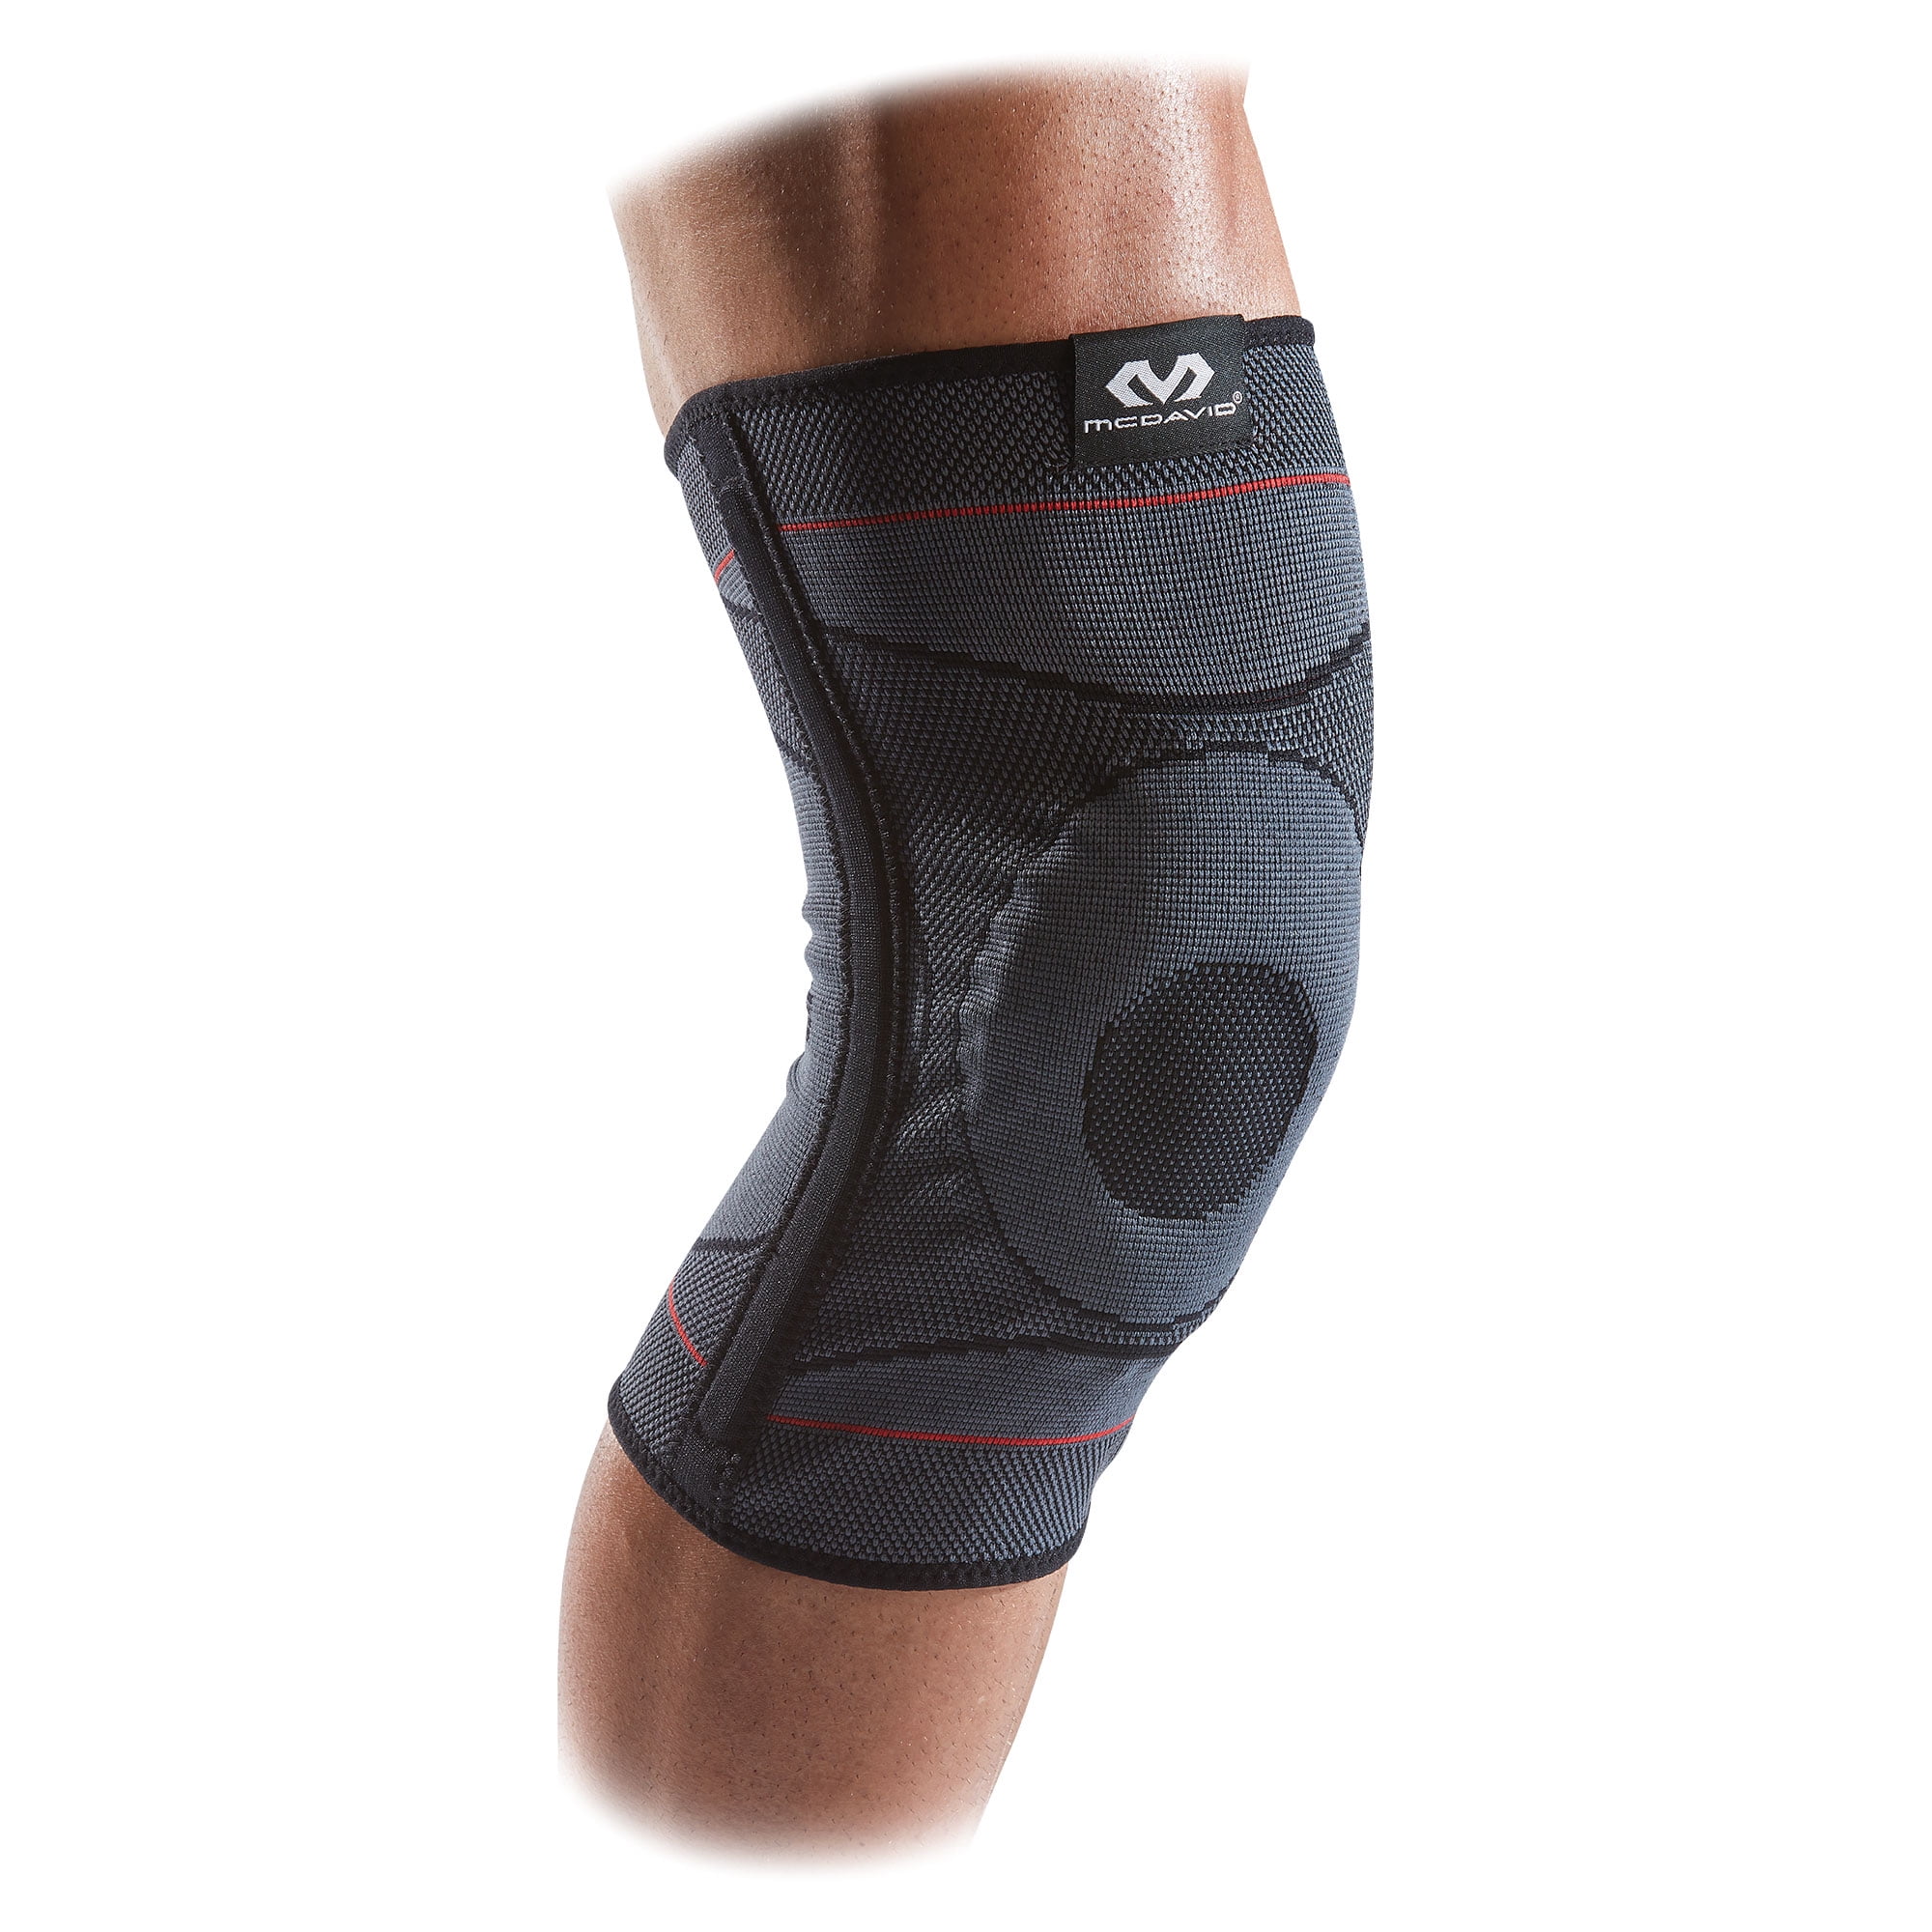 McDavid 5125 Knee Sleeve 4 Way Elastic Brace with Gel Buttress Support Level 2 